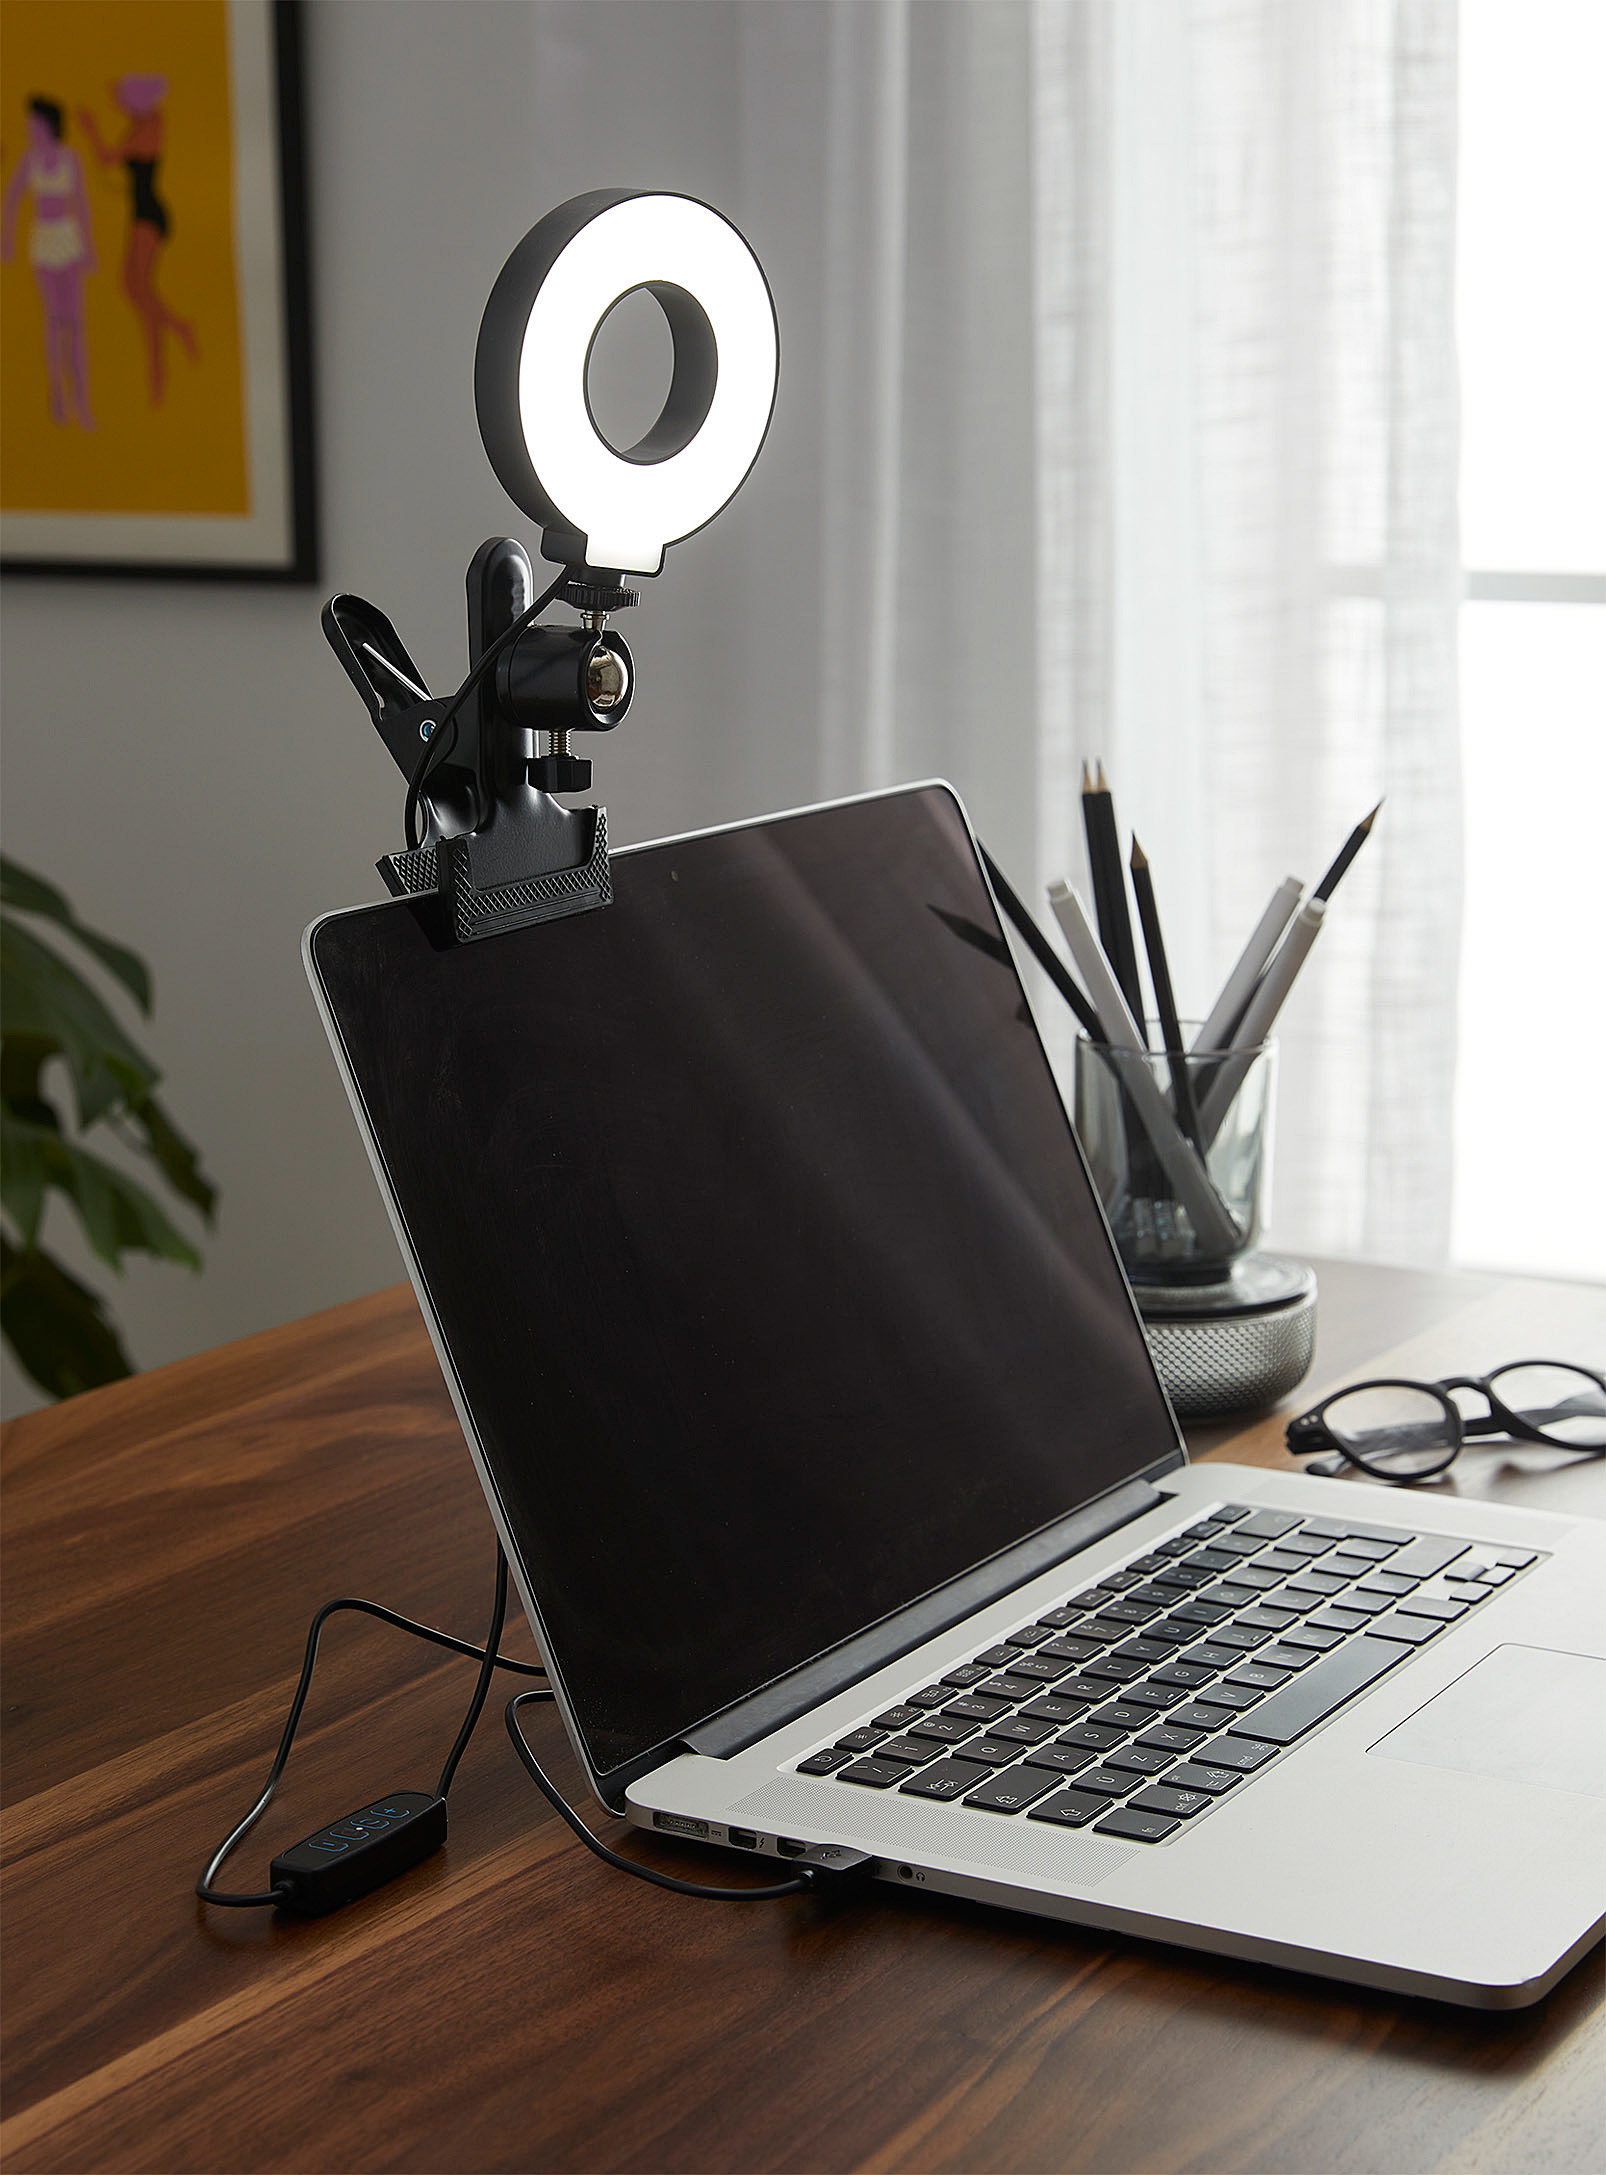 A petite ring light attached to the top of a laptop